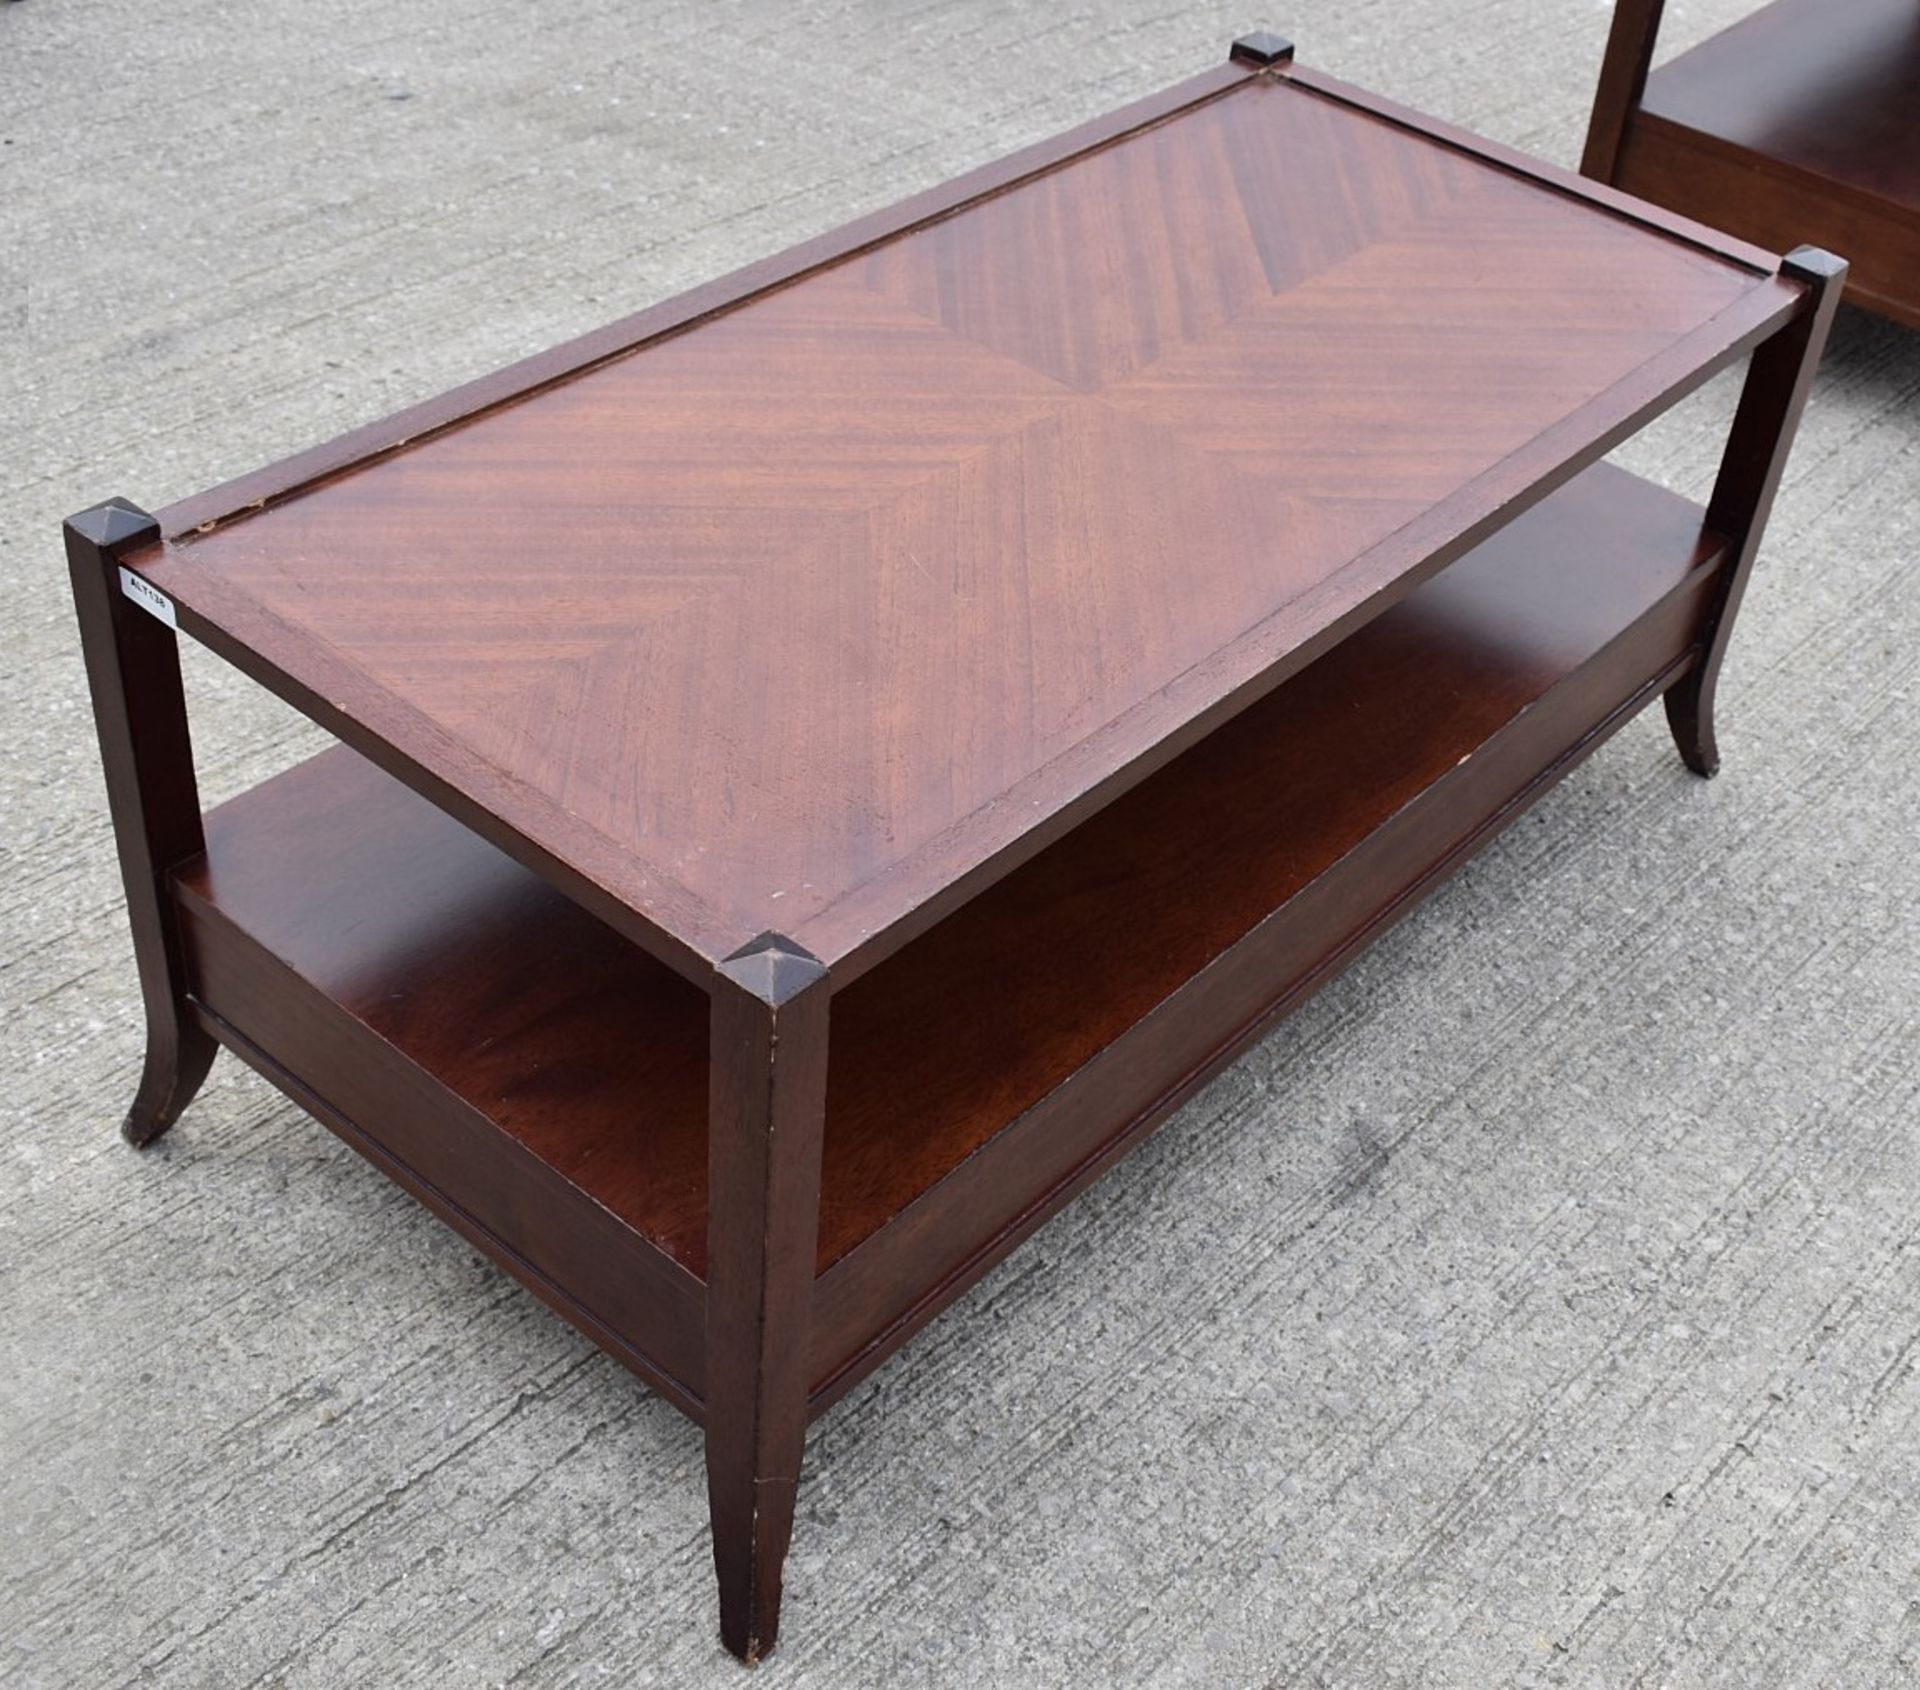 1 x Elegant Handcrafted Solid Wood Coffee / Cocktail Table with False Drawer Frontage - Recently - Bild 2 aus 2